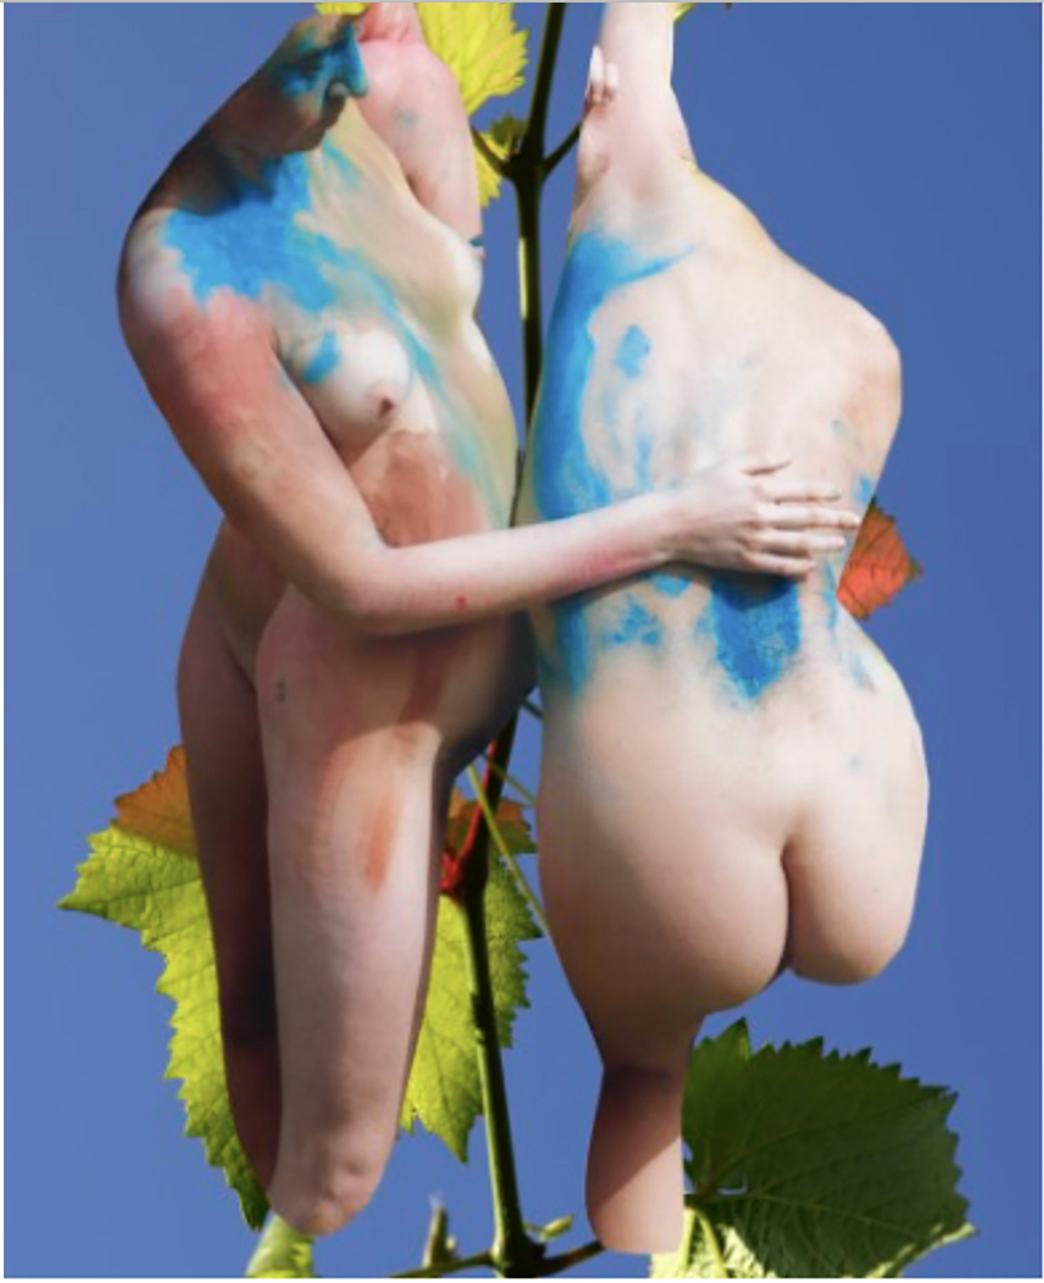 Collage of painted bodies and leaves